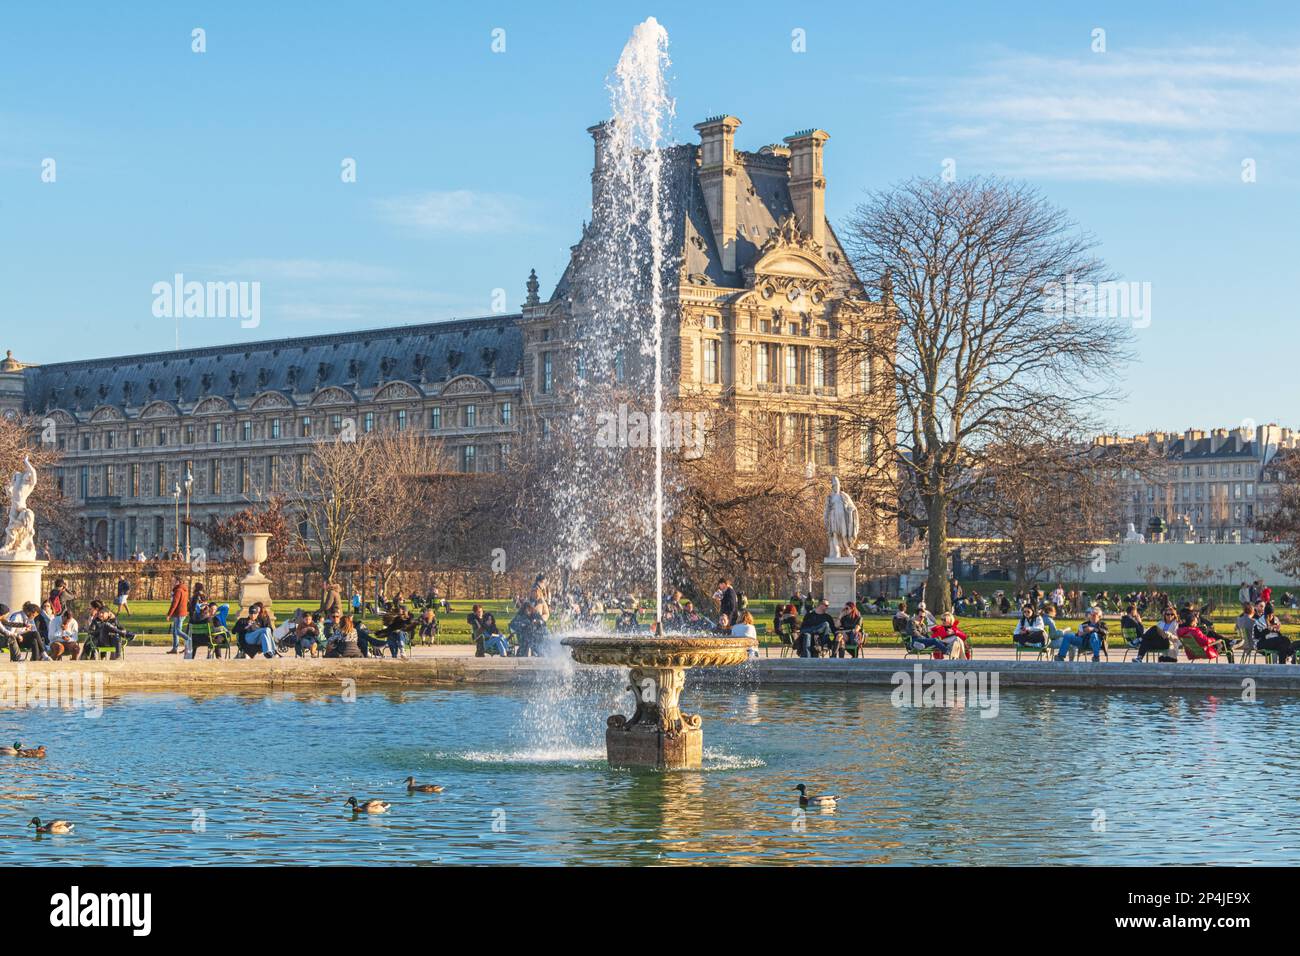 The Louvre School and the Ministry of Culture shot from the Tuileries Garden in Paris. Stock Photo